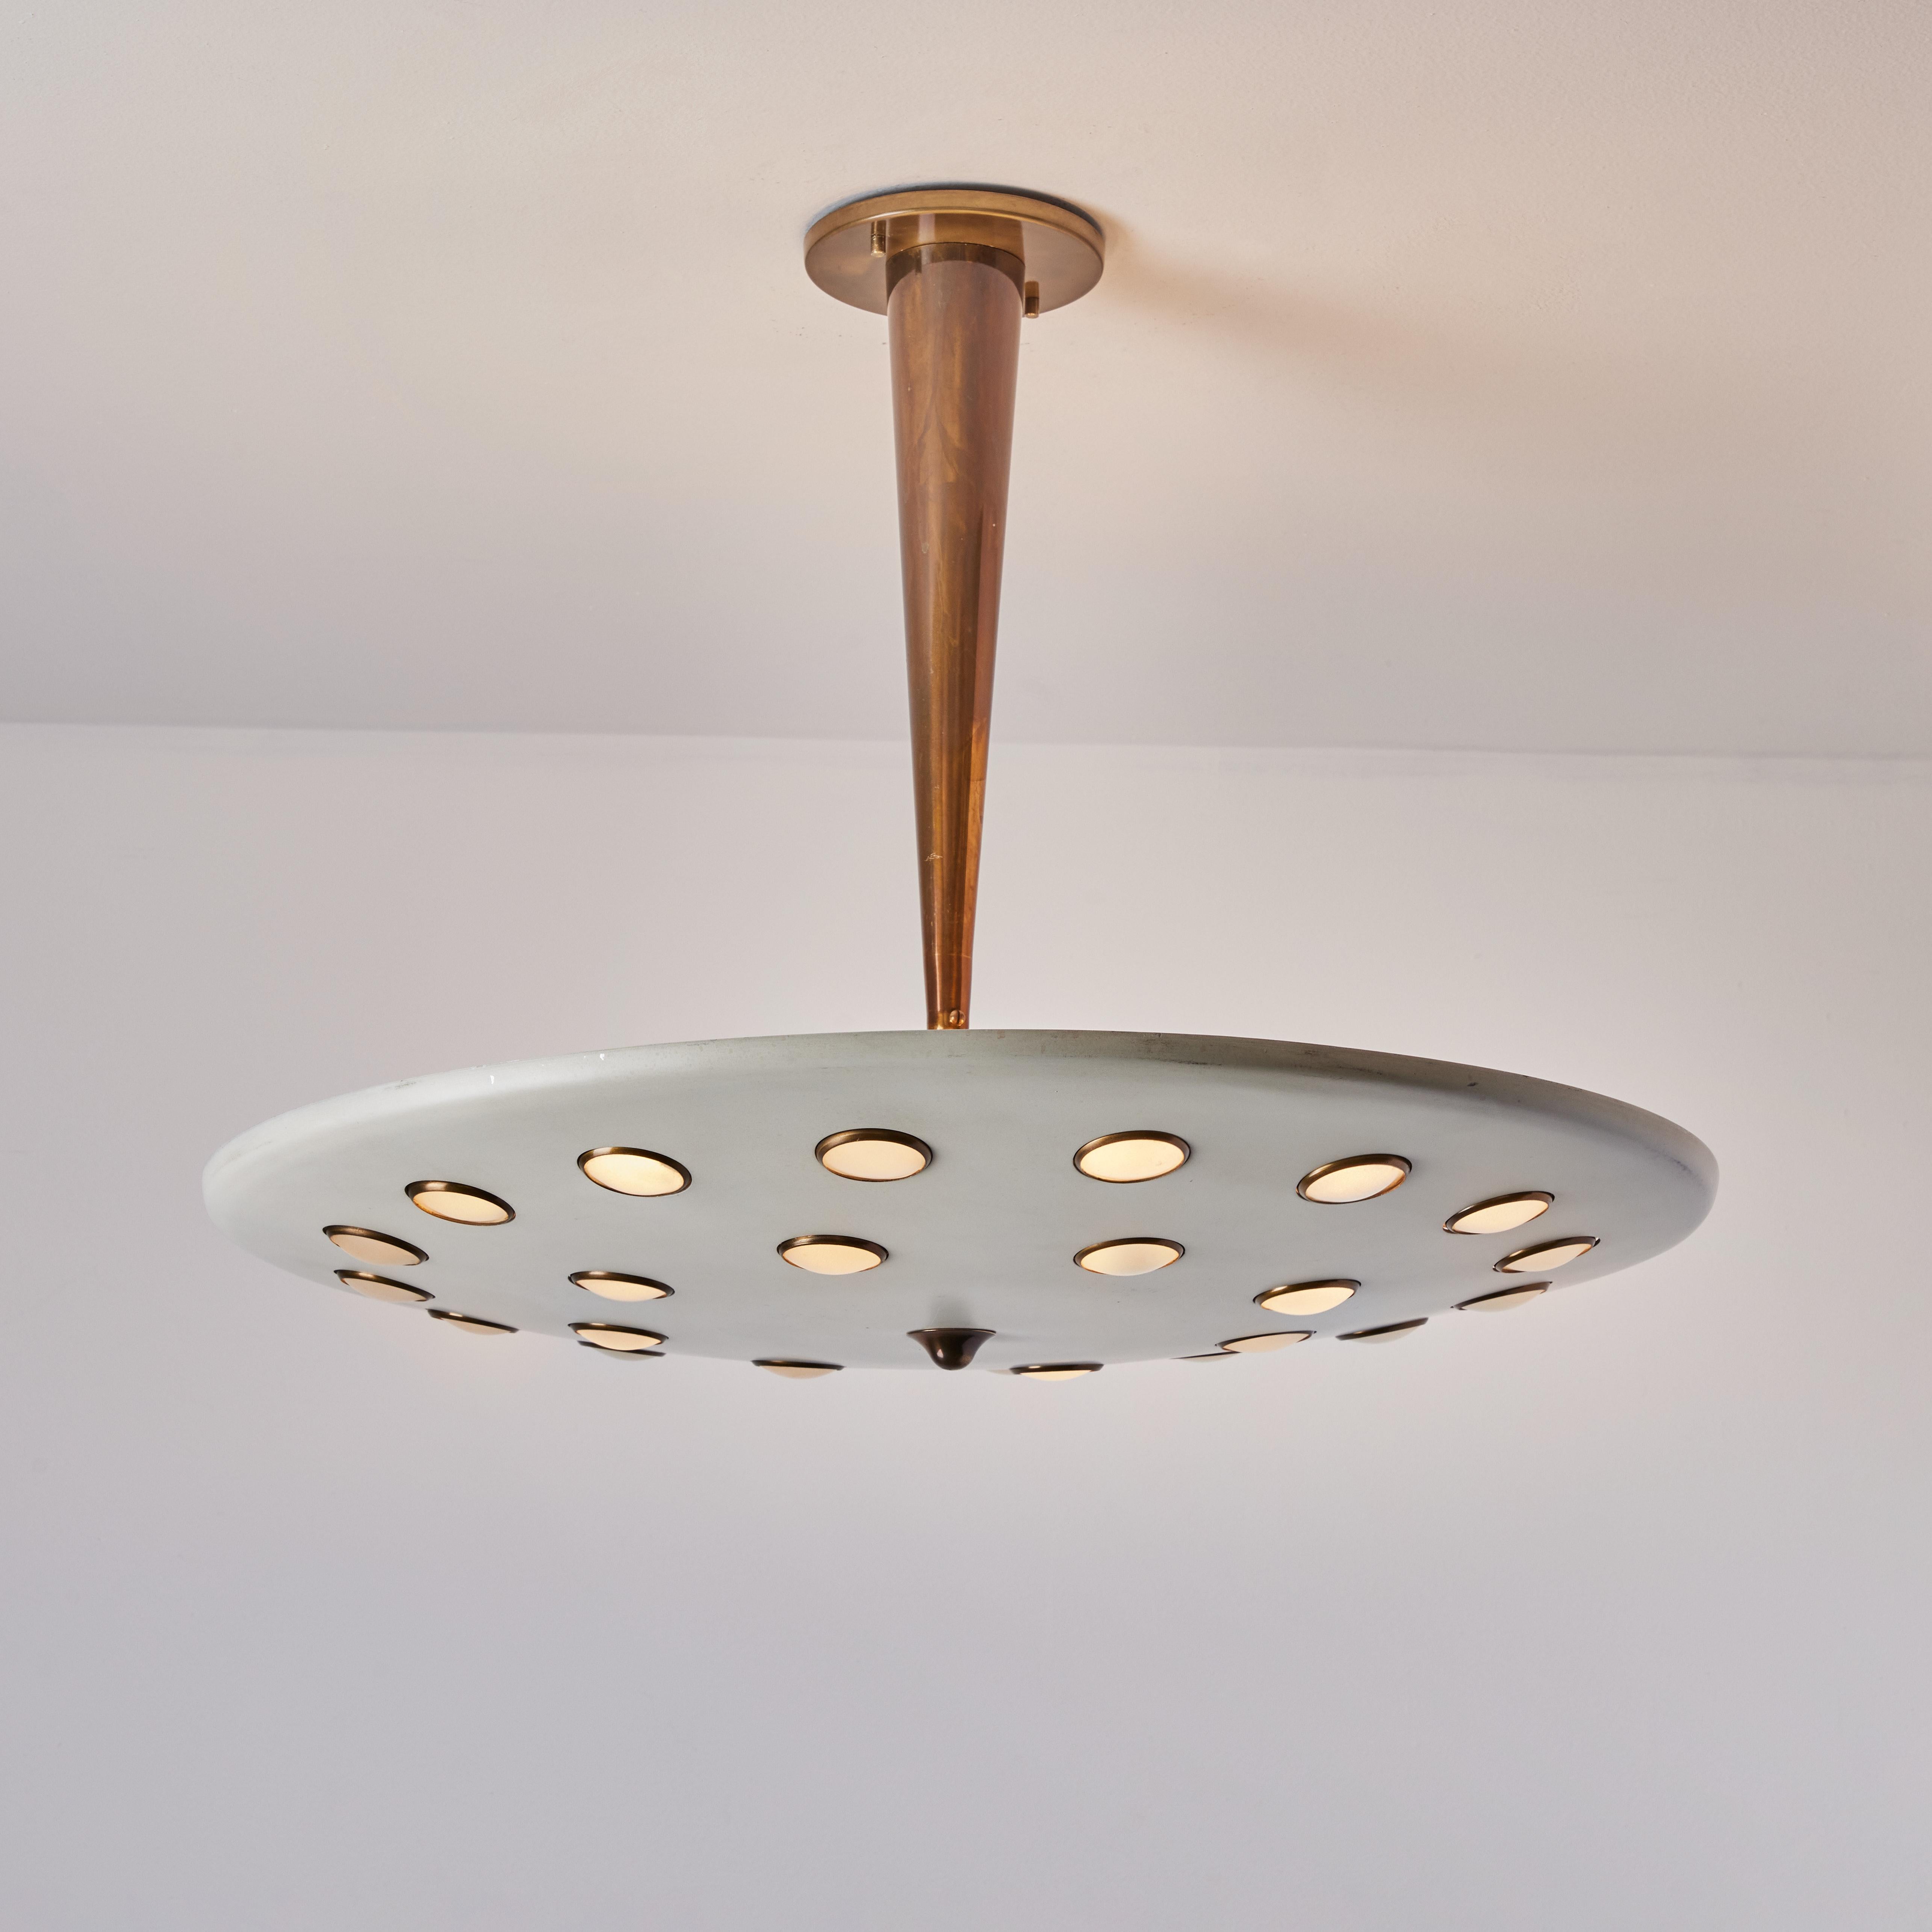 1950s Gino Sarfatti metal & glass circular ceiling lamp for Arteluce. An extremely attractively scaled ceiling lamp of incomparably refined design comprised of a large painted metal disc with circular cut outs holding brass framed thick glass